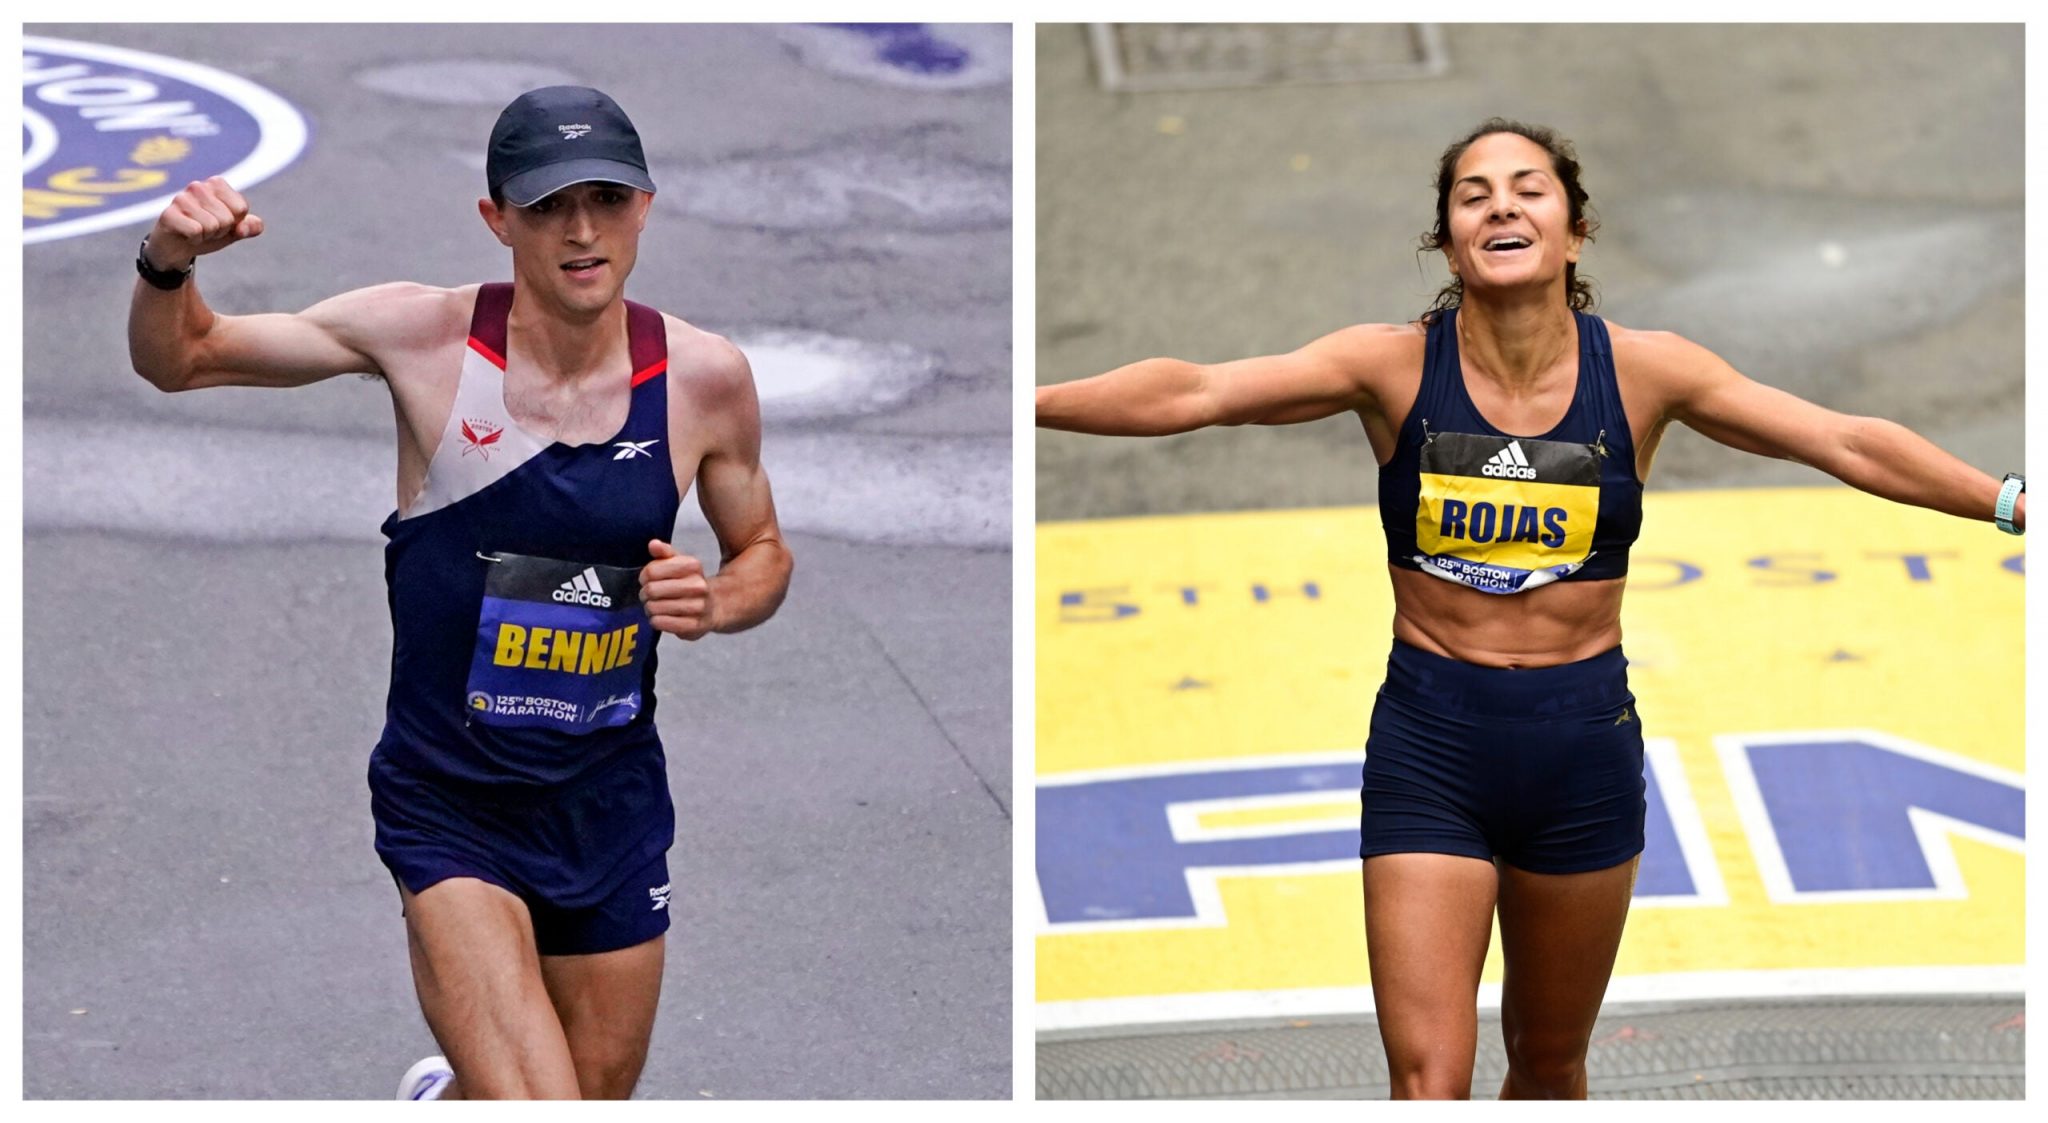 Top American finishers Colin Bennie and Nell Rojas on running the 2021